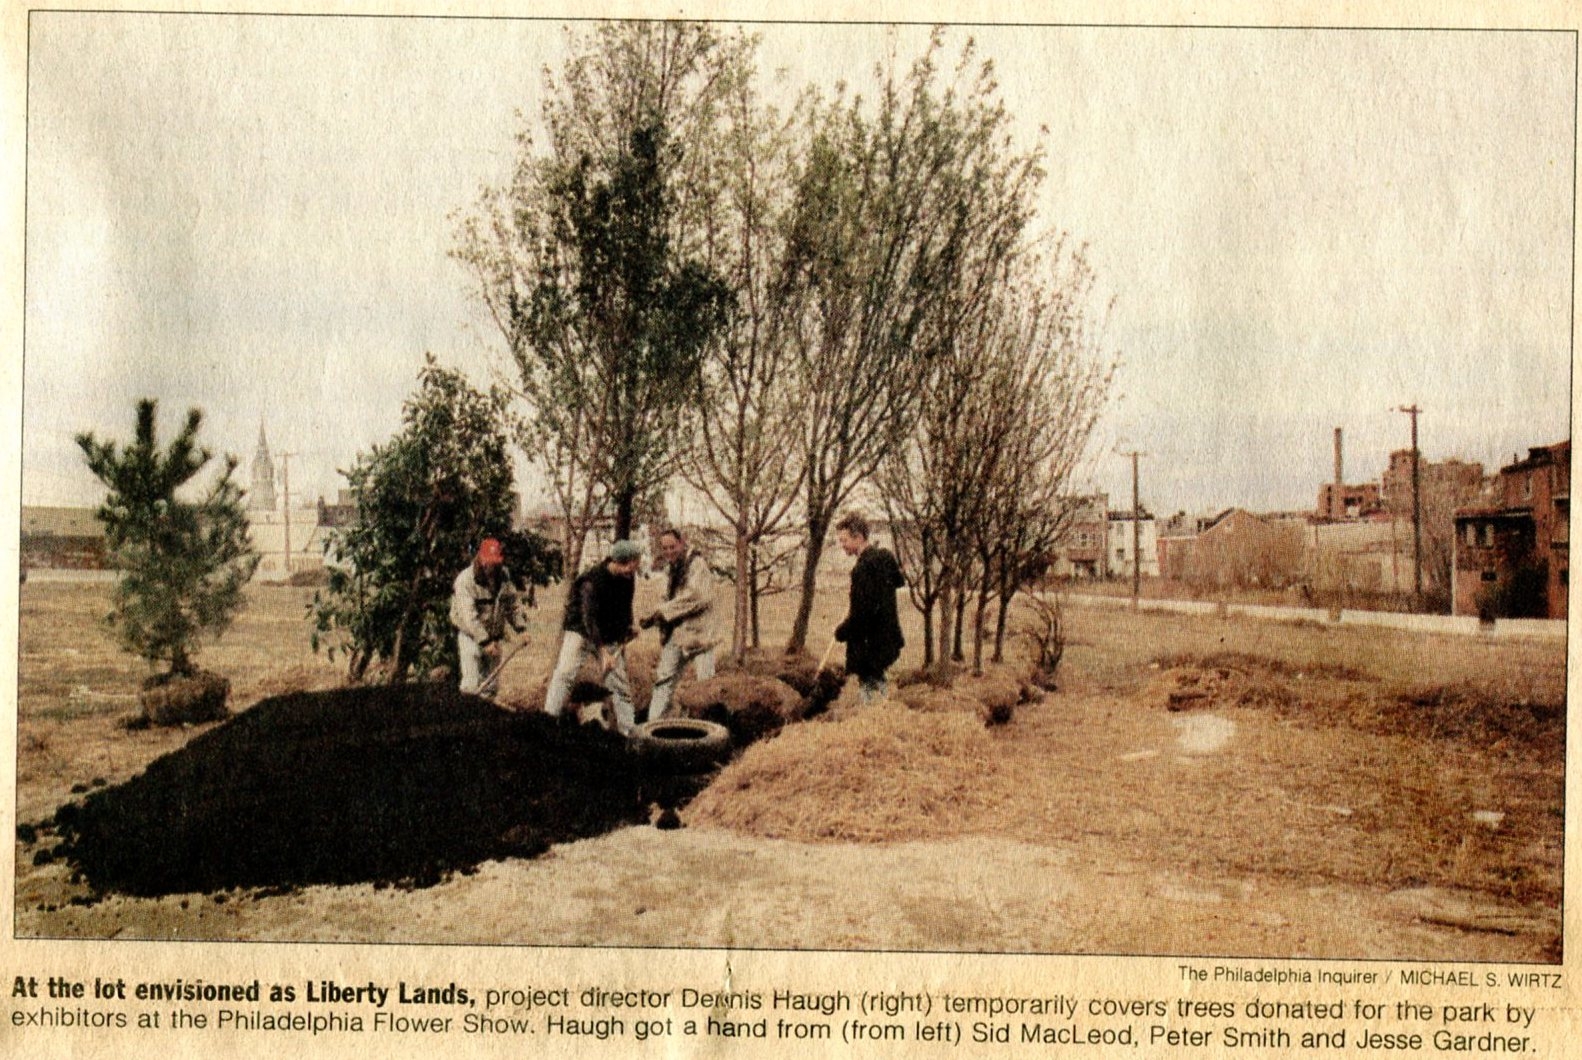 Planting the first trees in Liberty Lands circa 1997